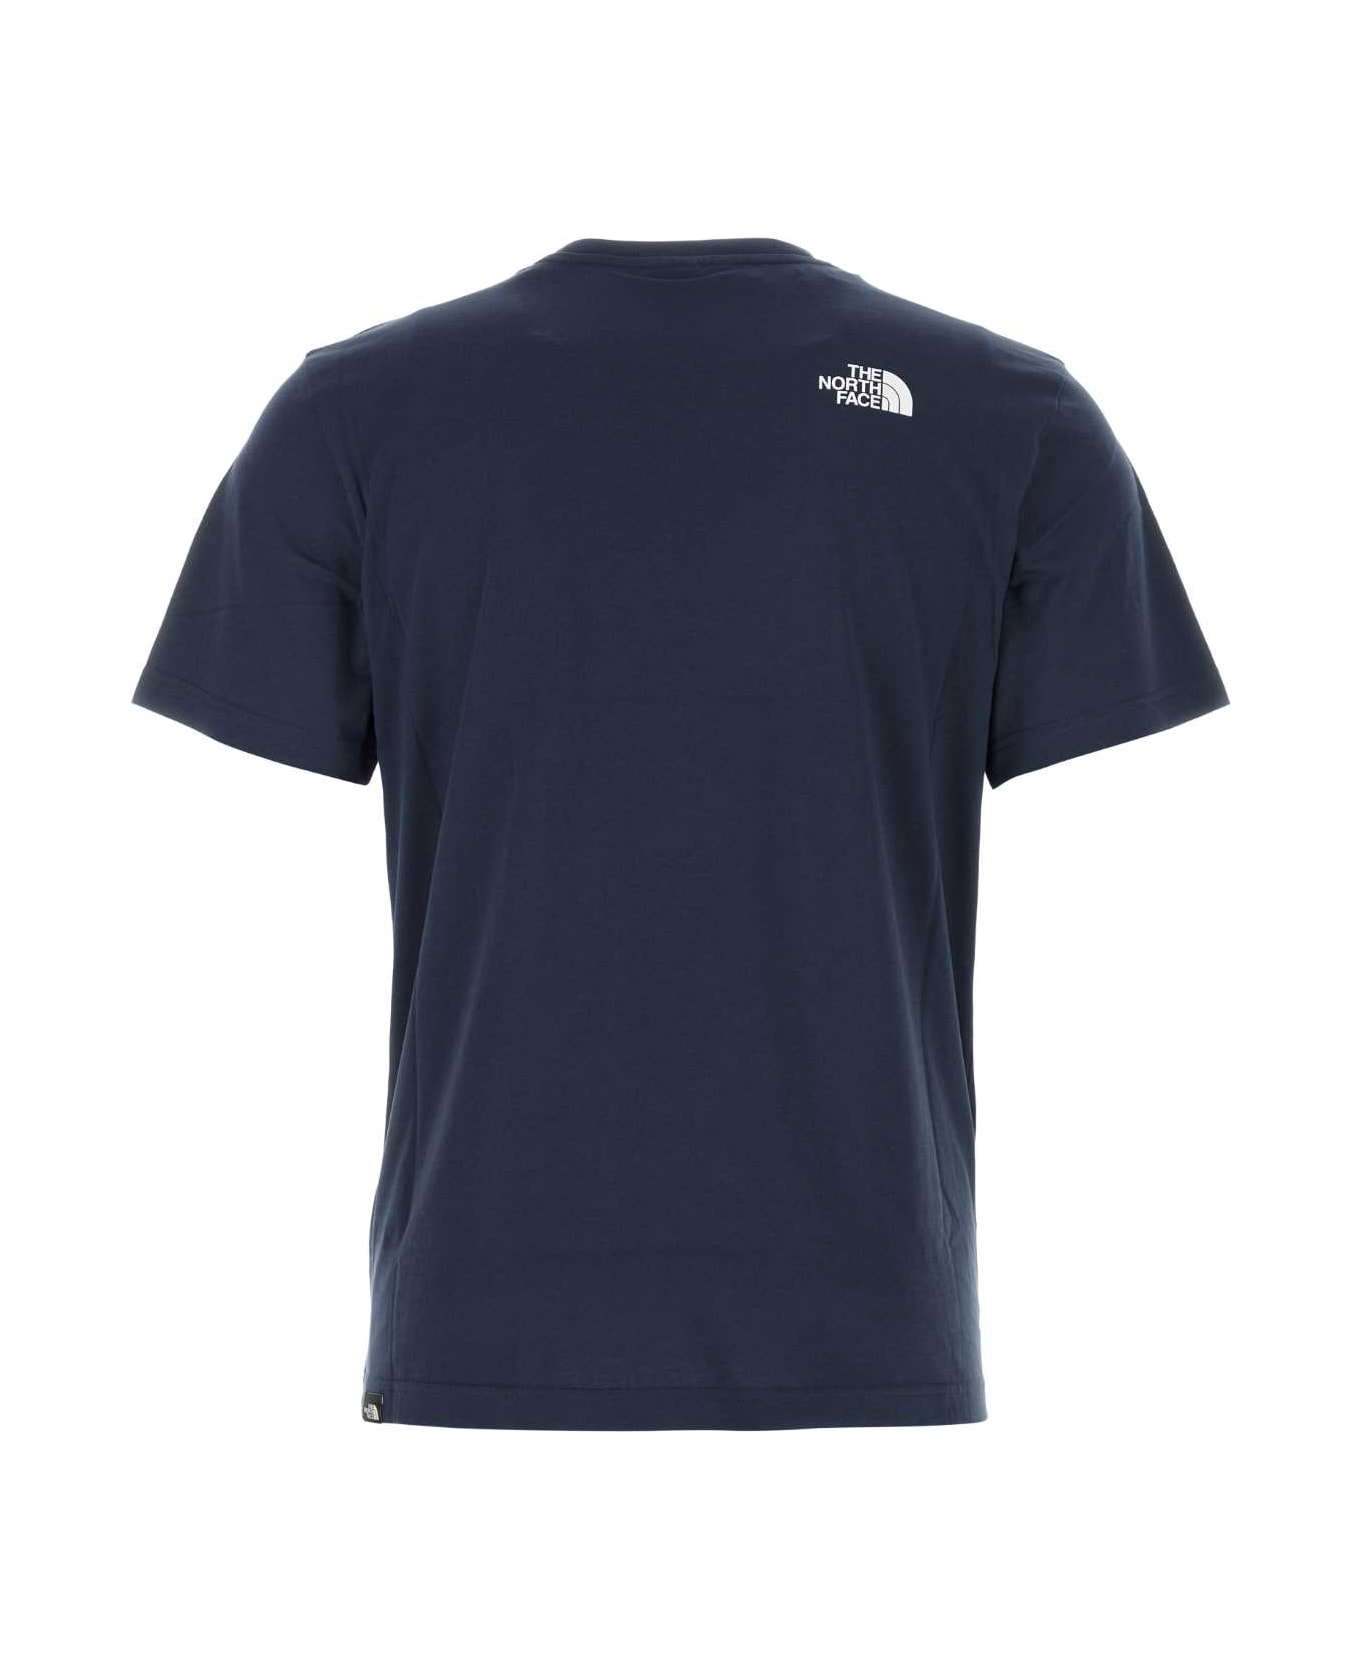 The North Face Navy Blue Cotton T-shirt - SUMMITNAVY